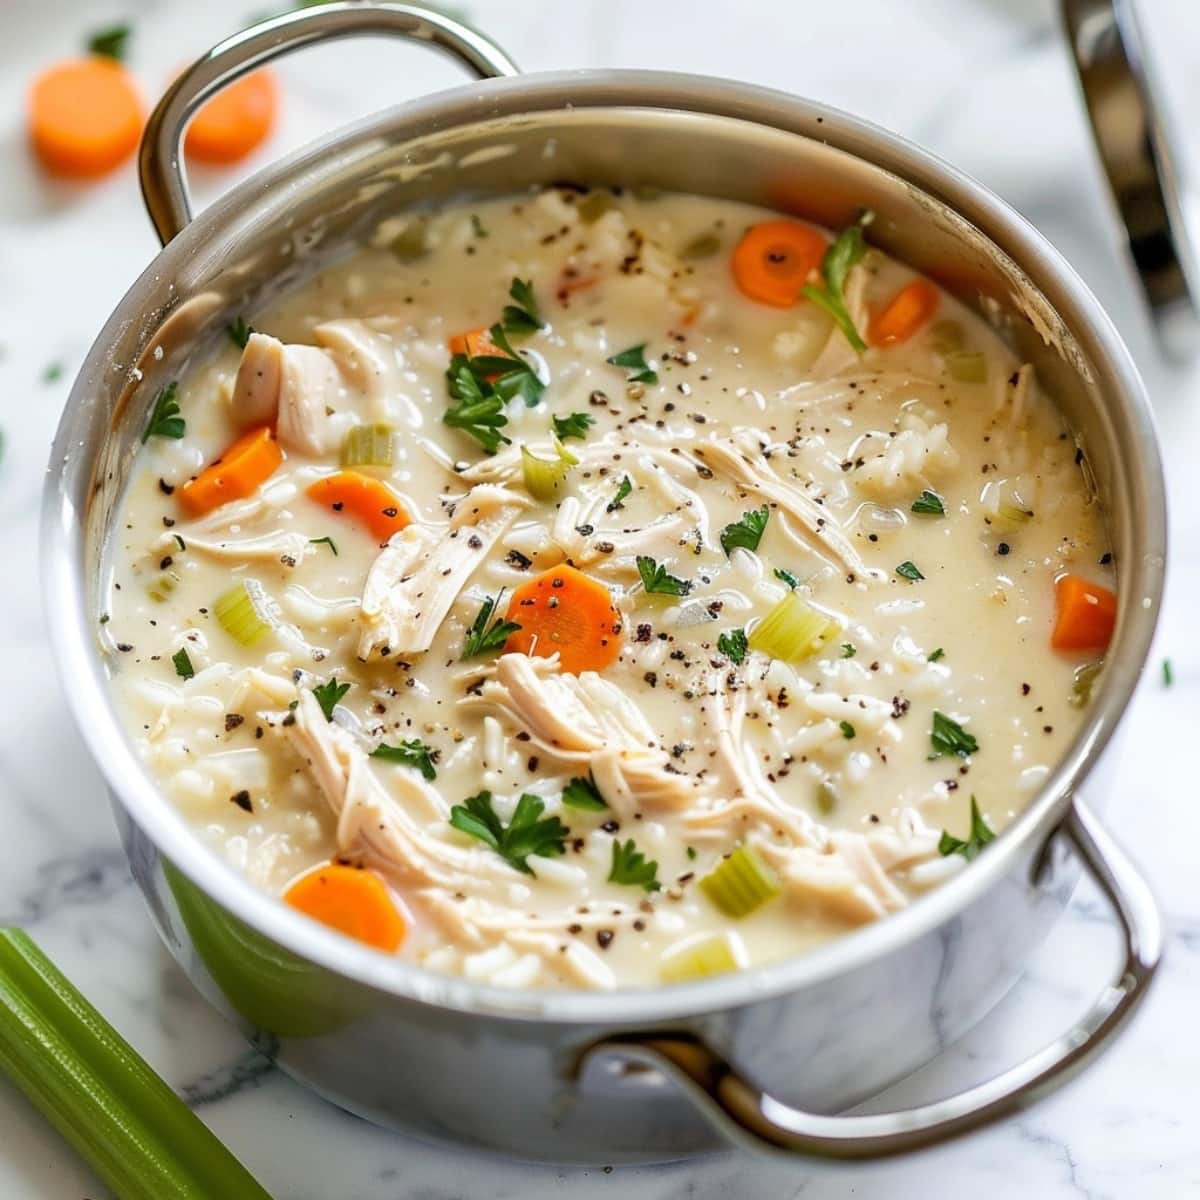 Chicken lemon rice soup in a stainless pot with chopped celery and carrots loaded with shredded chicken.